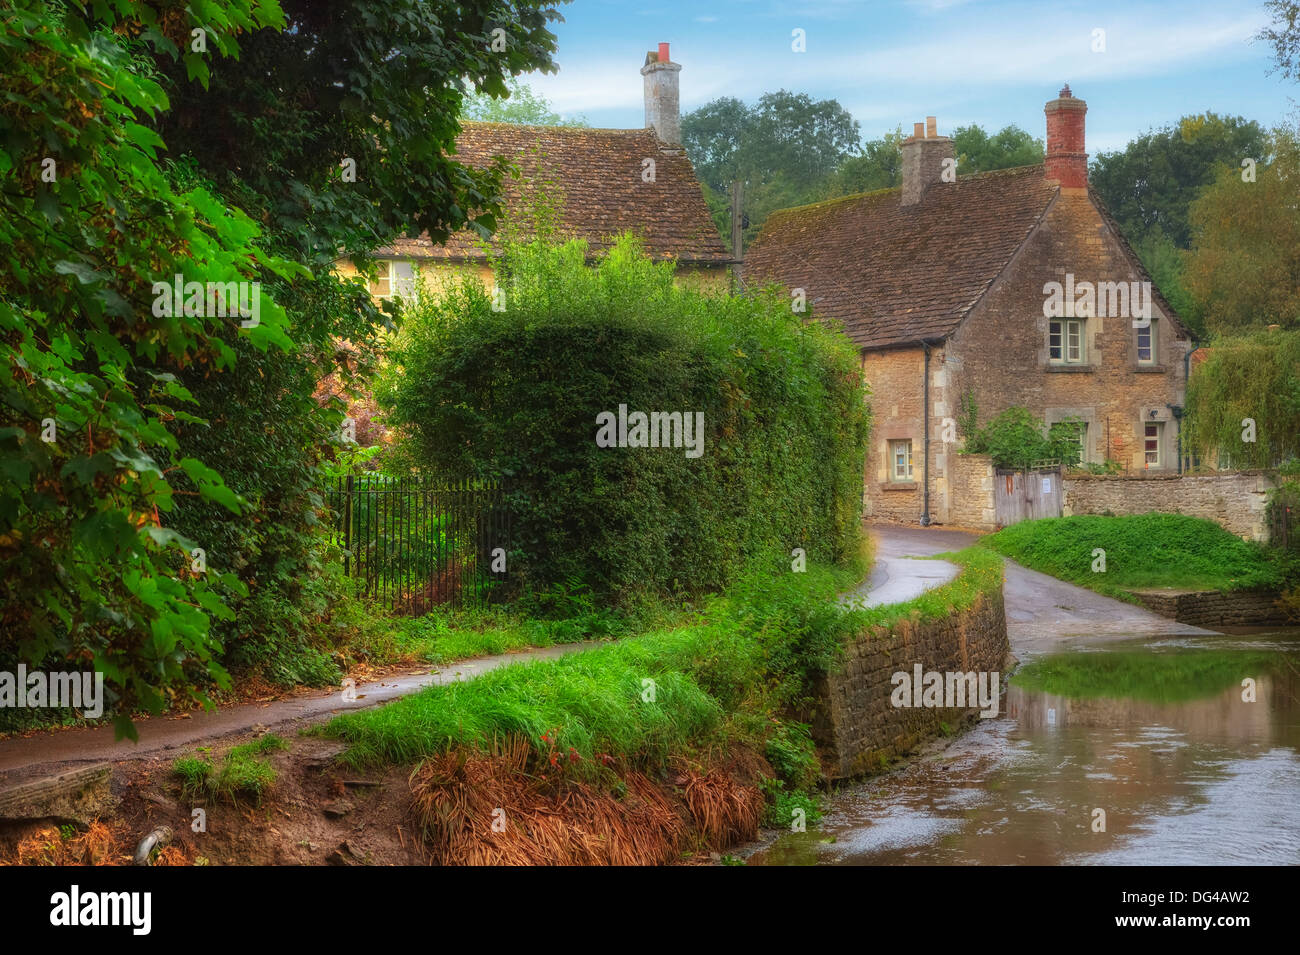 Lacock, Wiltshire, Angleterre, Royaume-Uni Banque D'Images